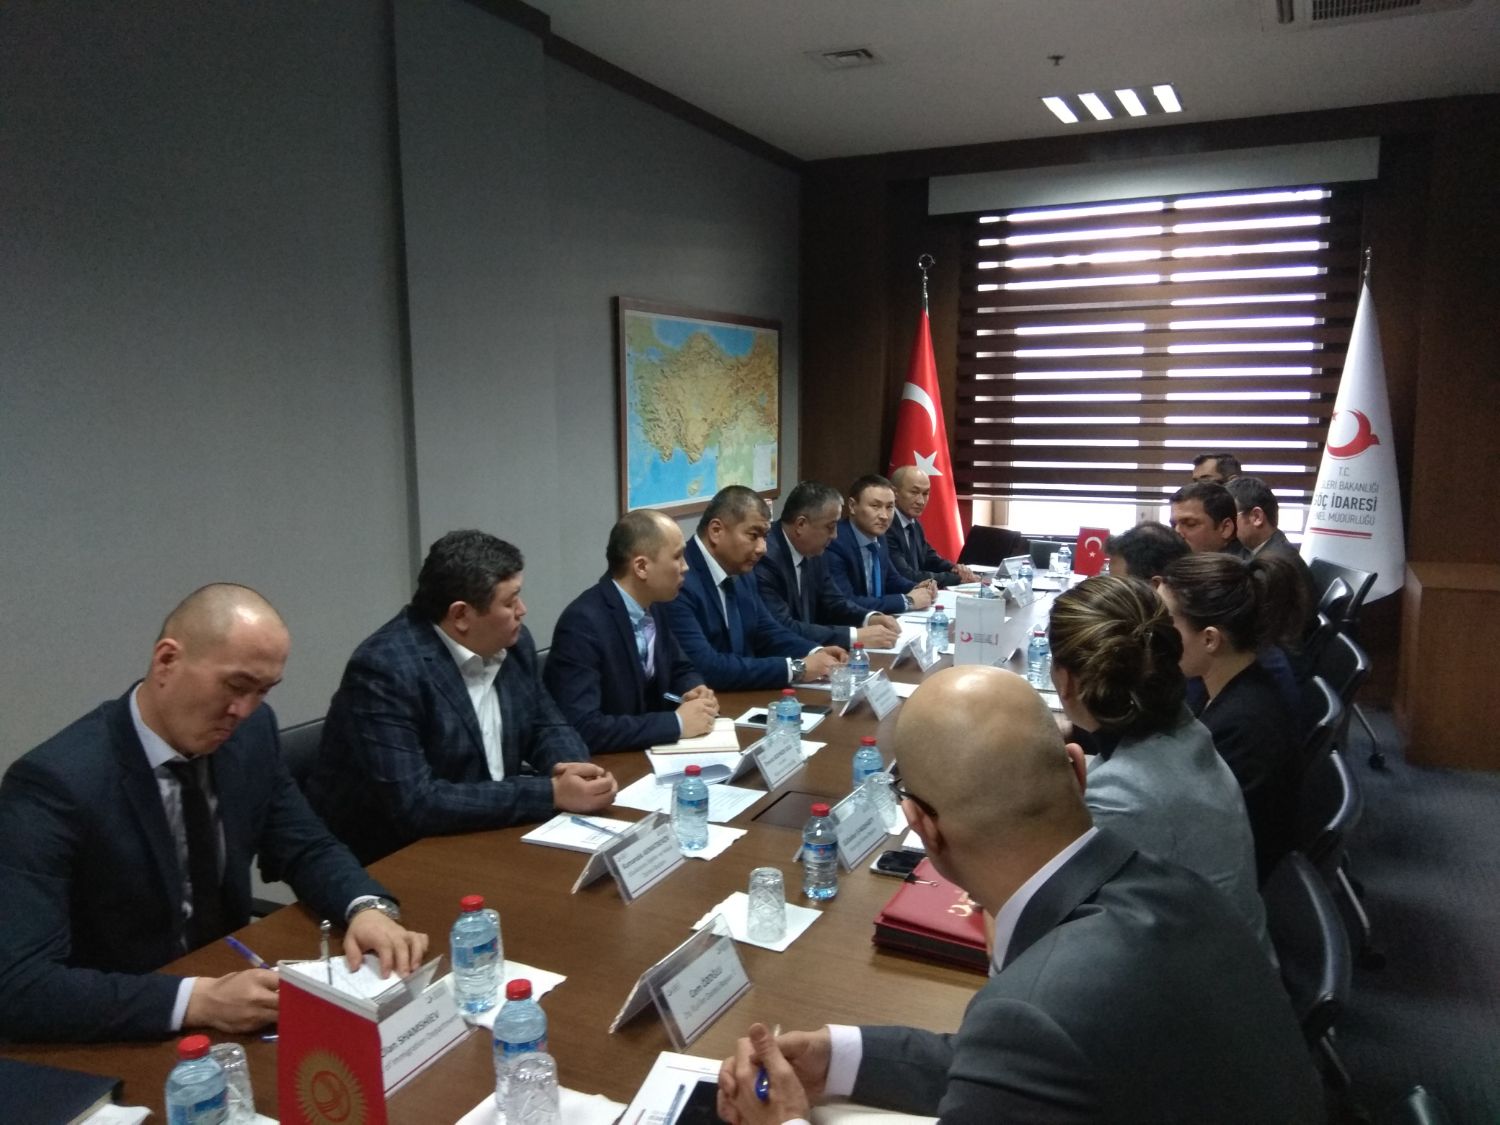 On February 26, 2019 in Ankara, with the assistance of the Embassy of the Kyrgyz Republic in Turkey, a visit of Kyrgyz delegation headed by S.Toktokolotov, Deputy Chairman of the State Migration Service under the Government of the Kyrgyz Republic. 